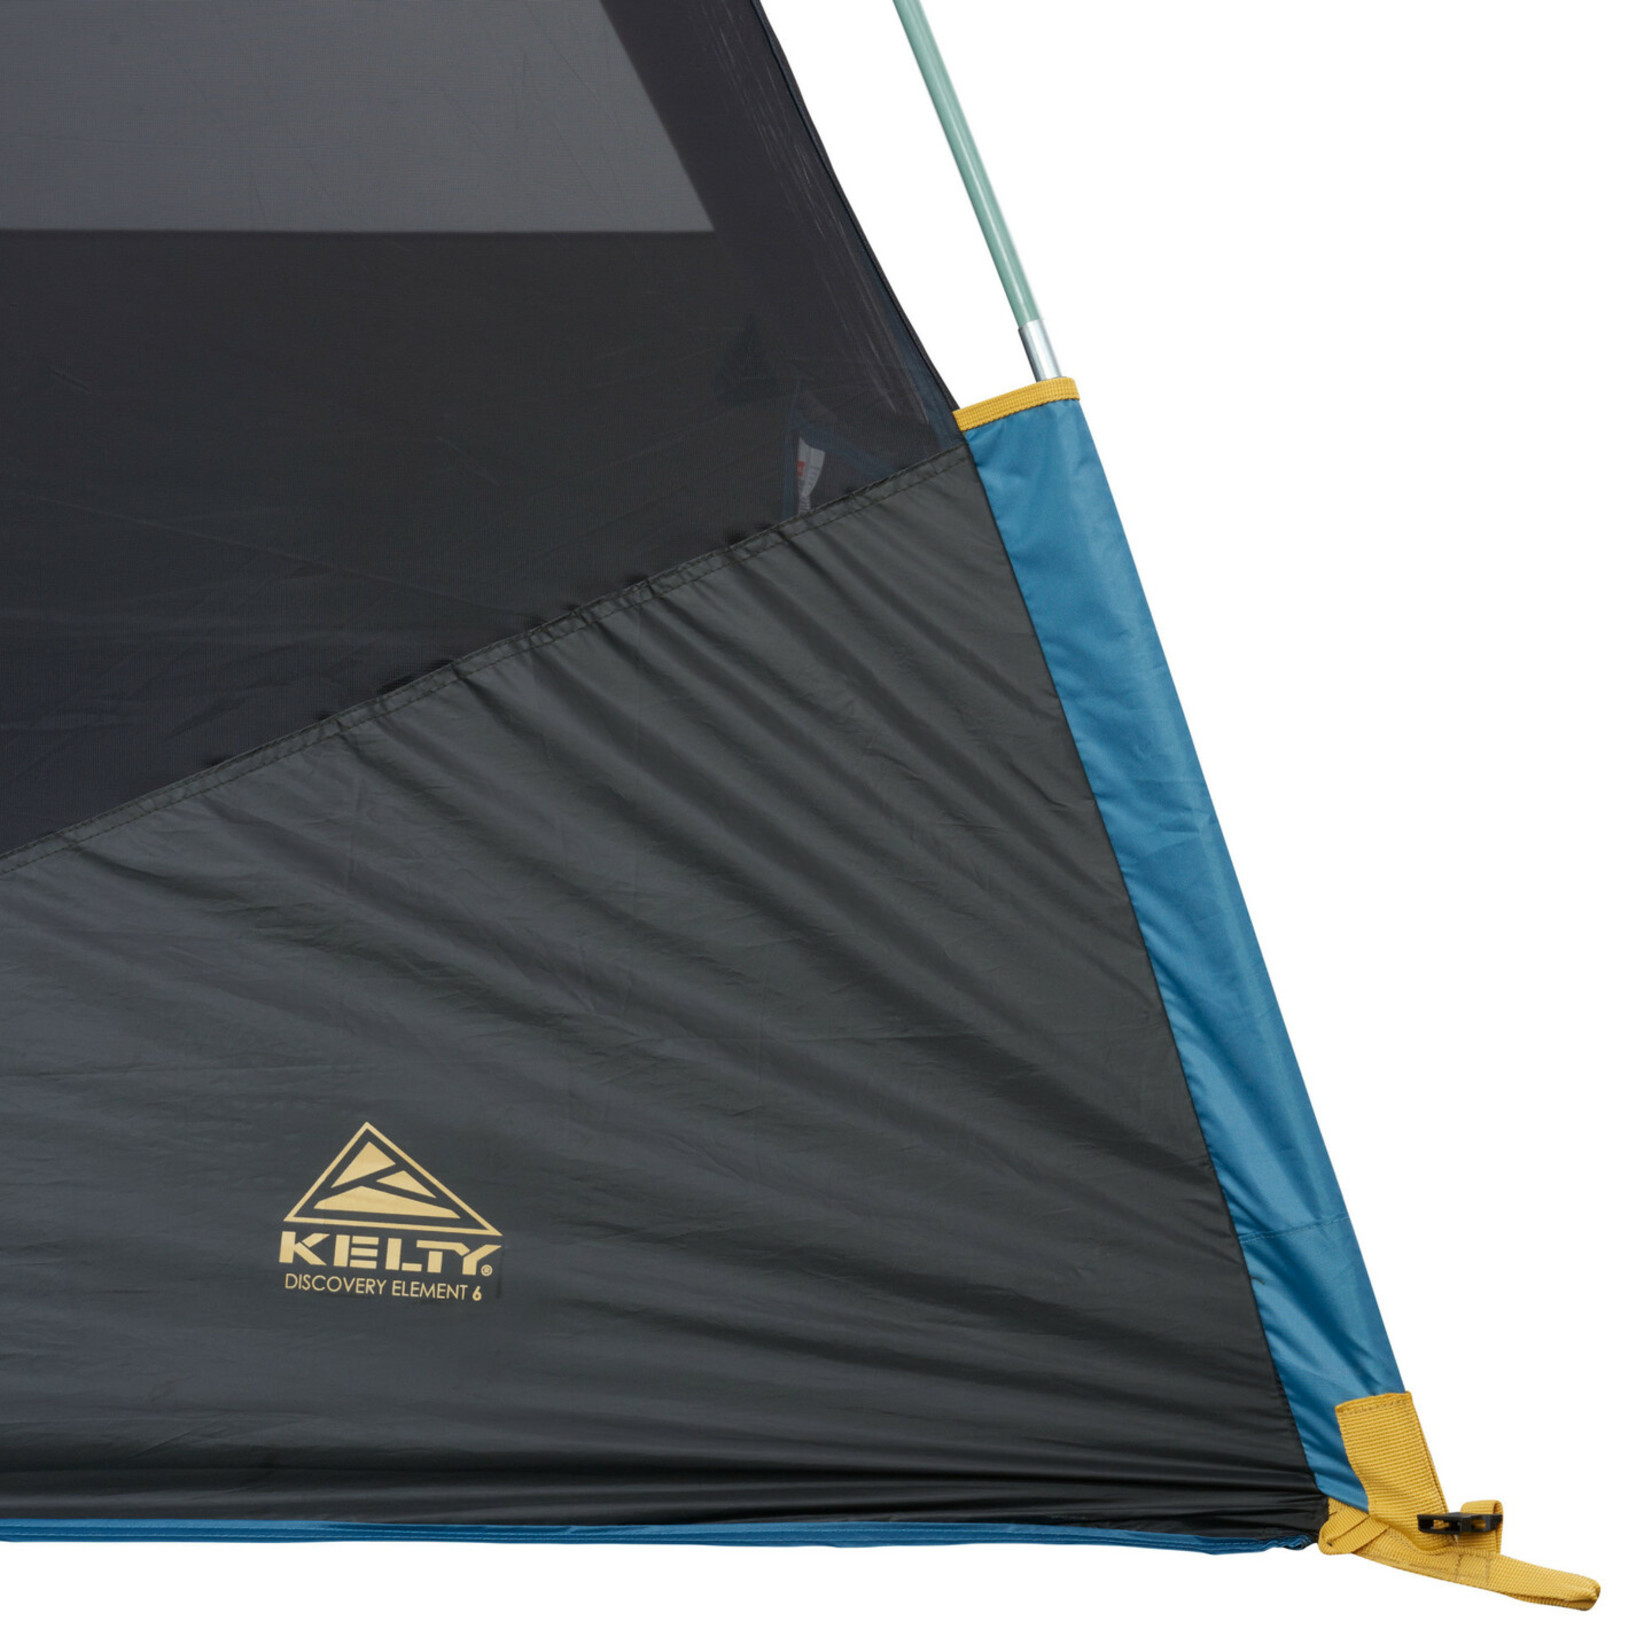 Kelty Kelty Discovery Element 6 Tent